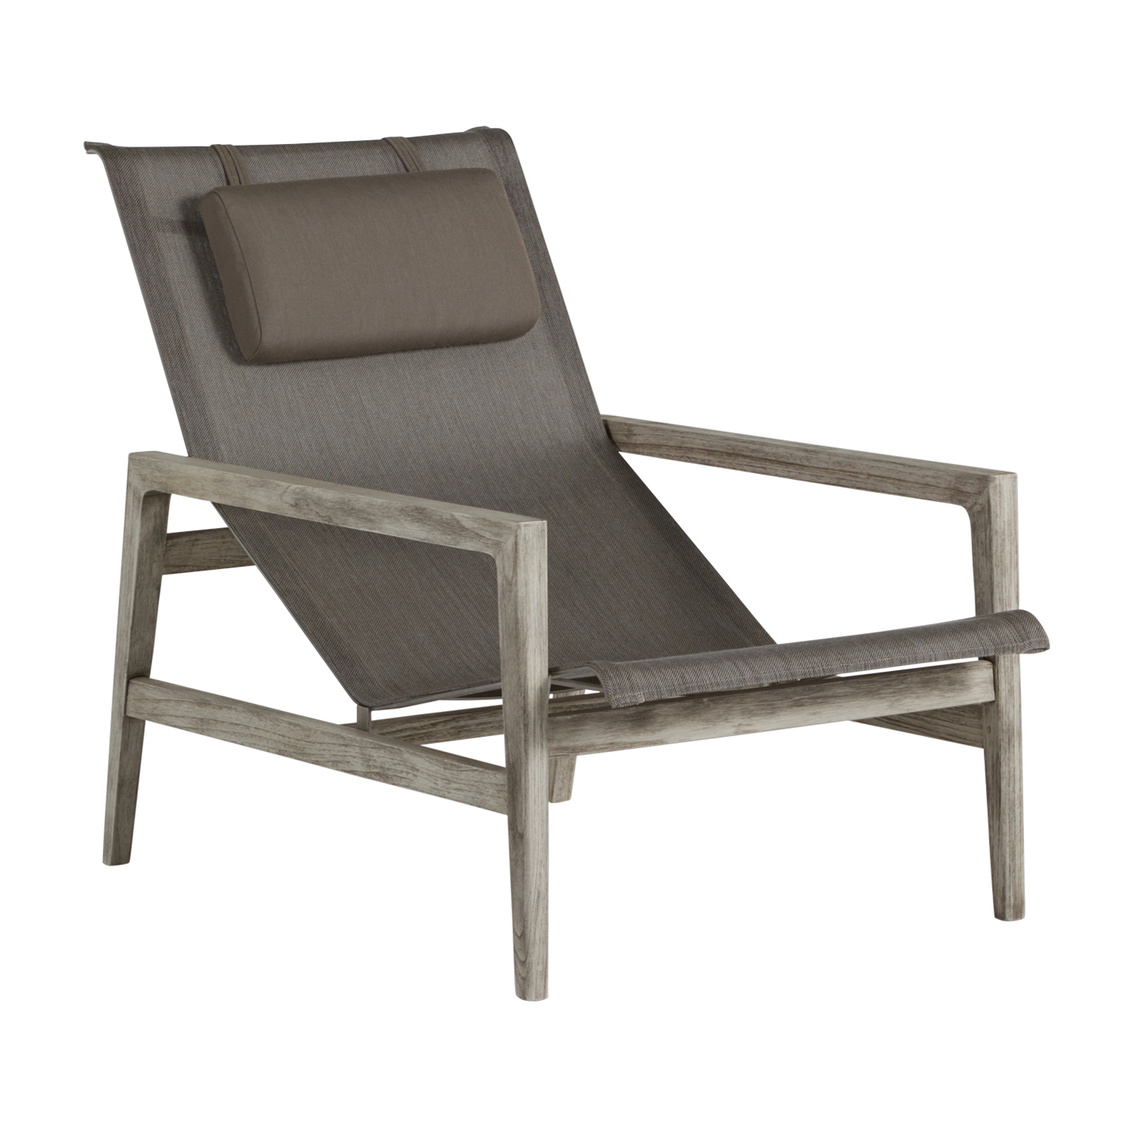 coast teak easy chair in oyster teak / heather grey sling – frame only product image